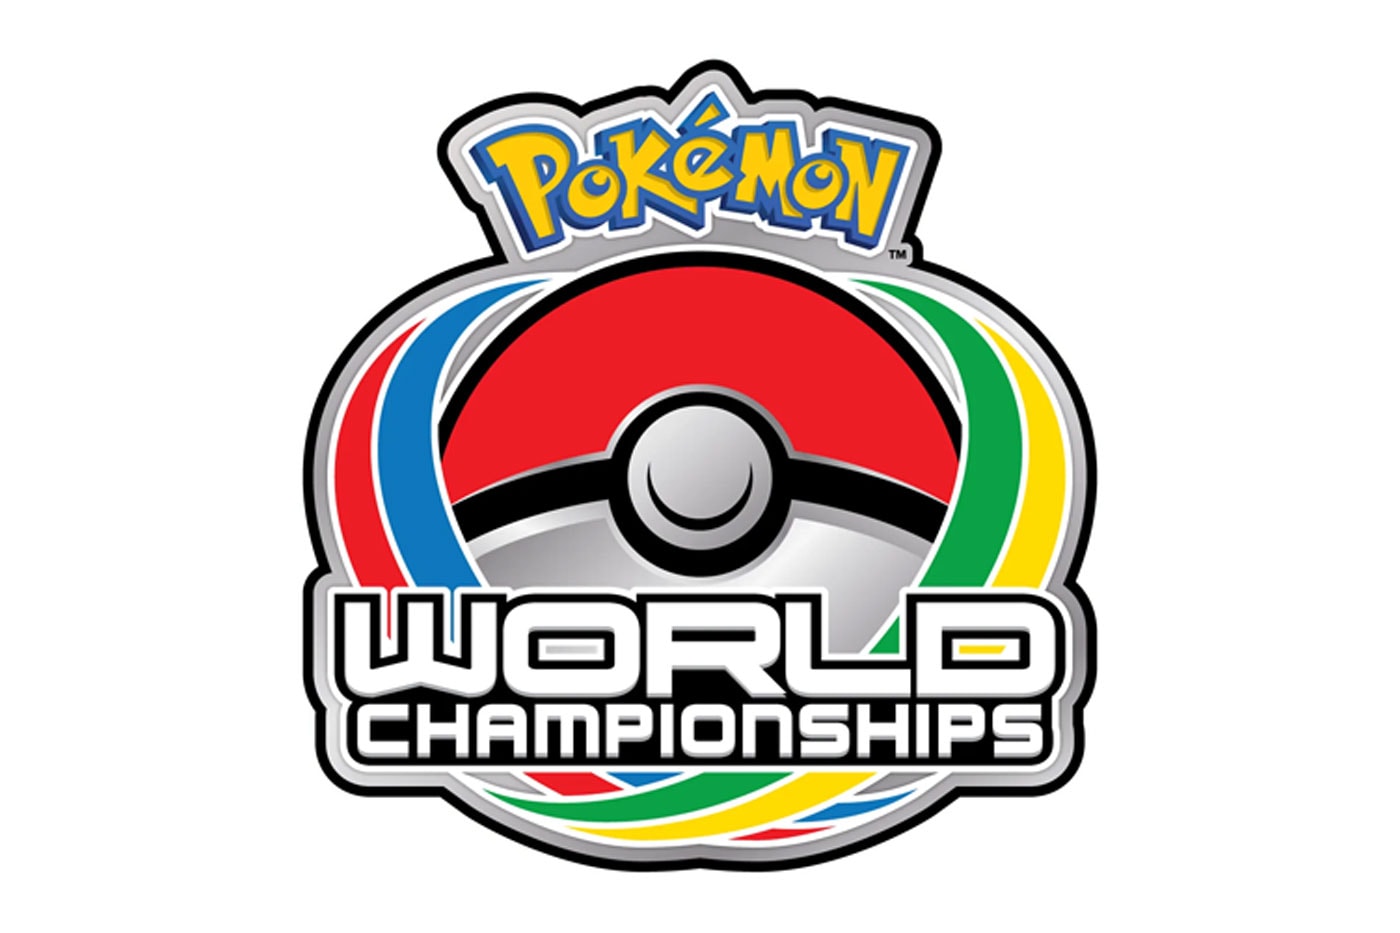 2022 Pokémon World Championships Dates and Venue Have Officially Been Announced pikachu anime trading cards tcg north america latin america europe oceania excel london